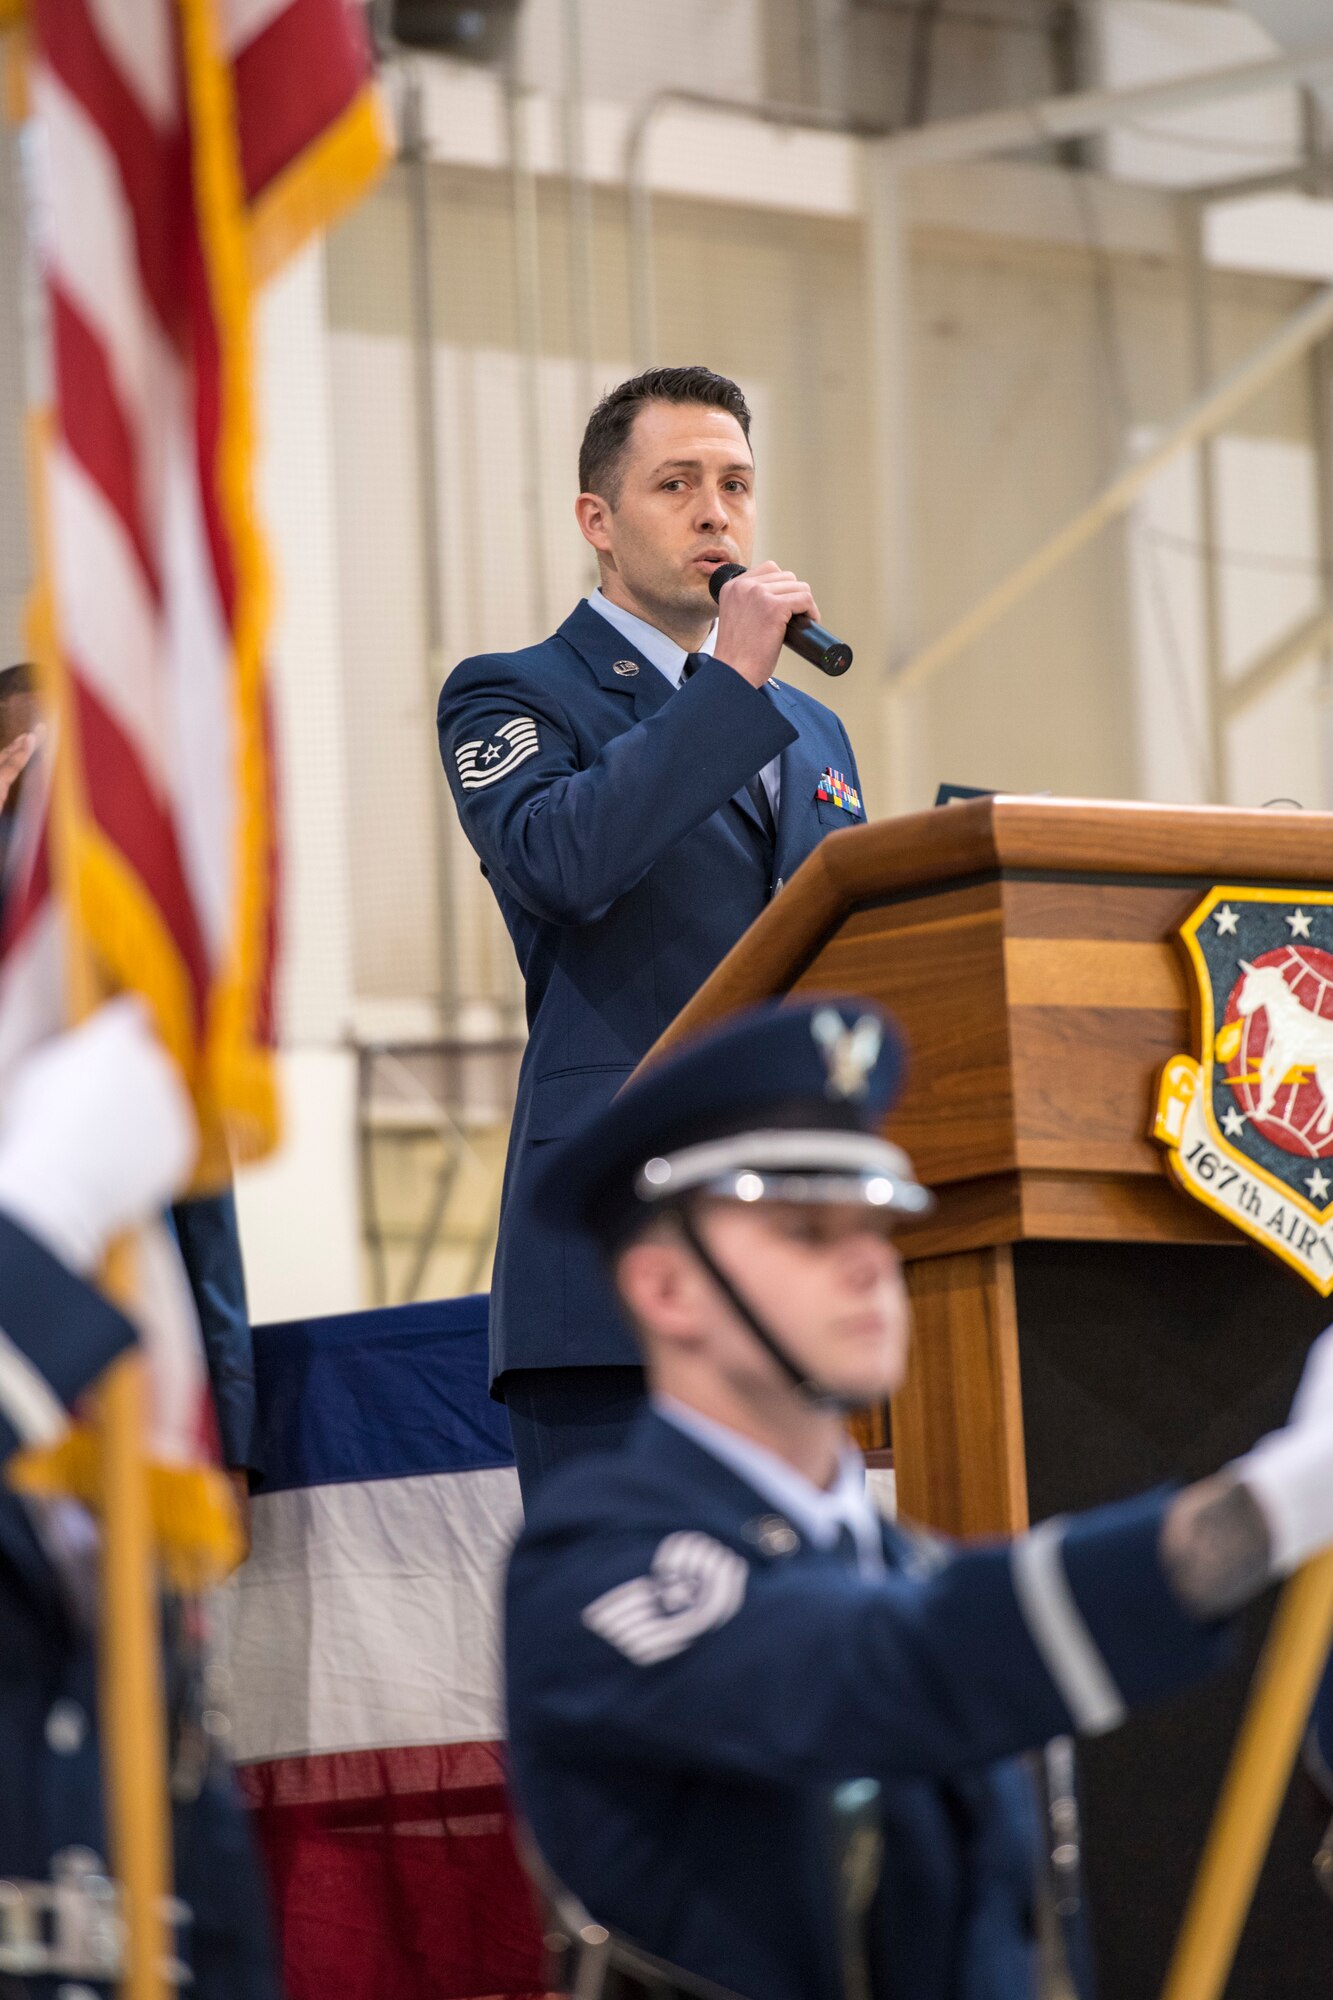 Tech. Sgt. Joshua Robins sings the national anthem flag at the start of a change of command ceremony, Jan. 12, 2020. Col. Martin Timko assumed command of the wing and Col. David Cochran relinquished command during the ceremony.